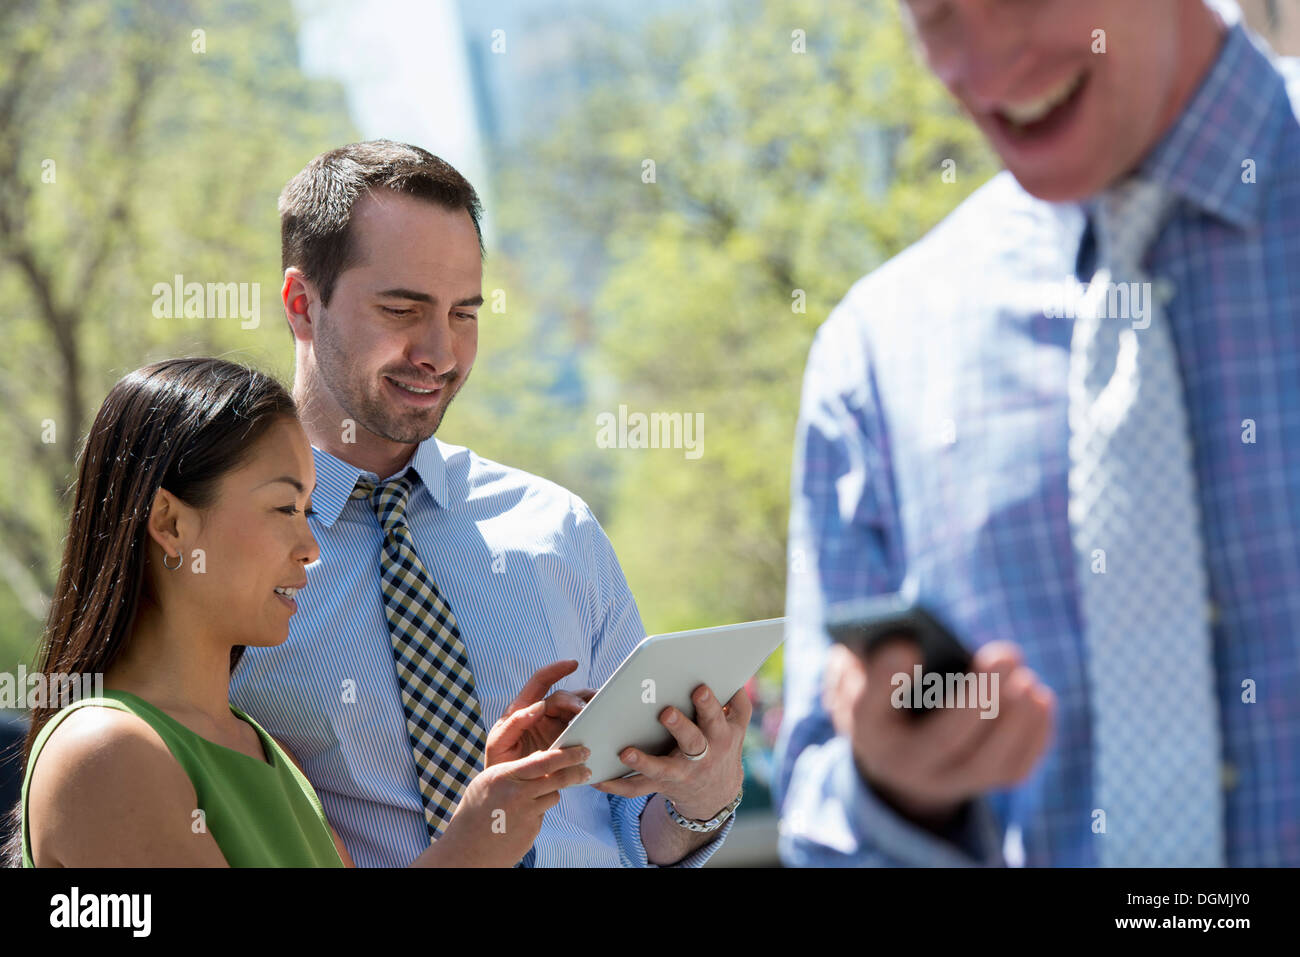 A businesswoman and two businessmen outdoors in the city. Checking their phones. Stock Photo